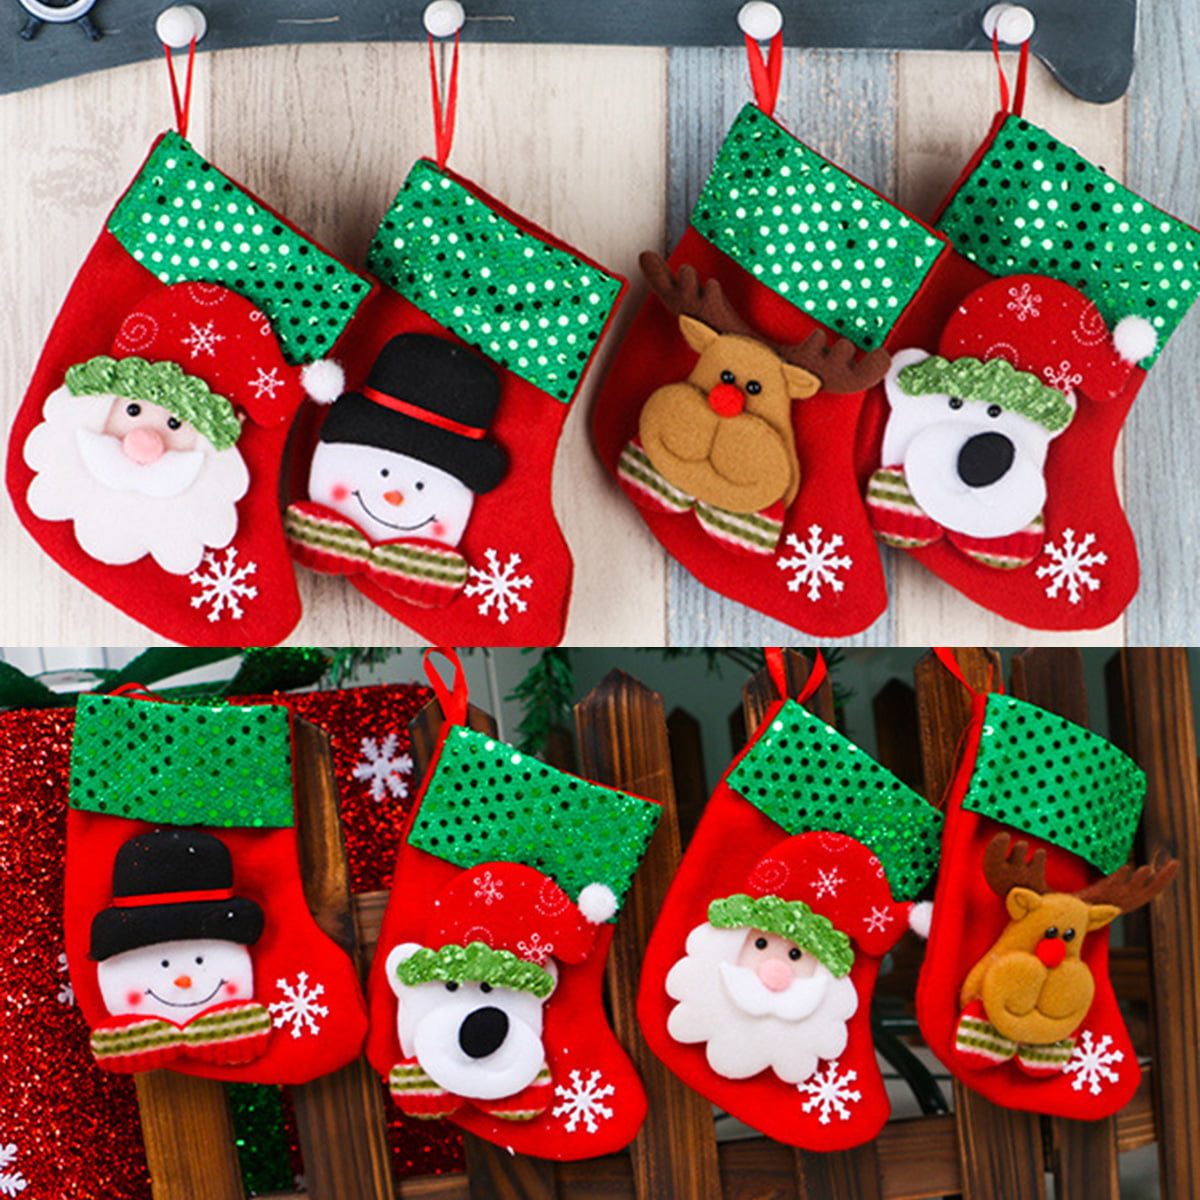 Details about   Christmas Stocking Ornaments Xmas Party Hanging Candy Gifts Bag Holder Door Deco 